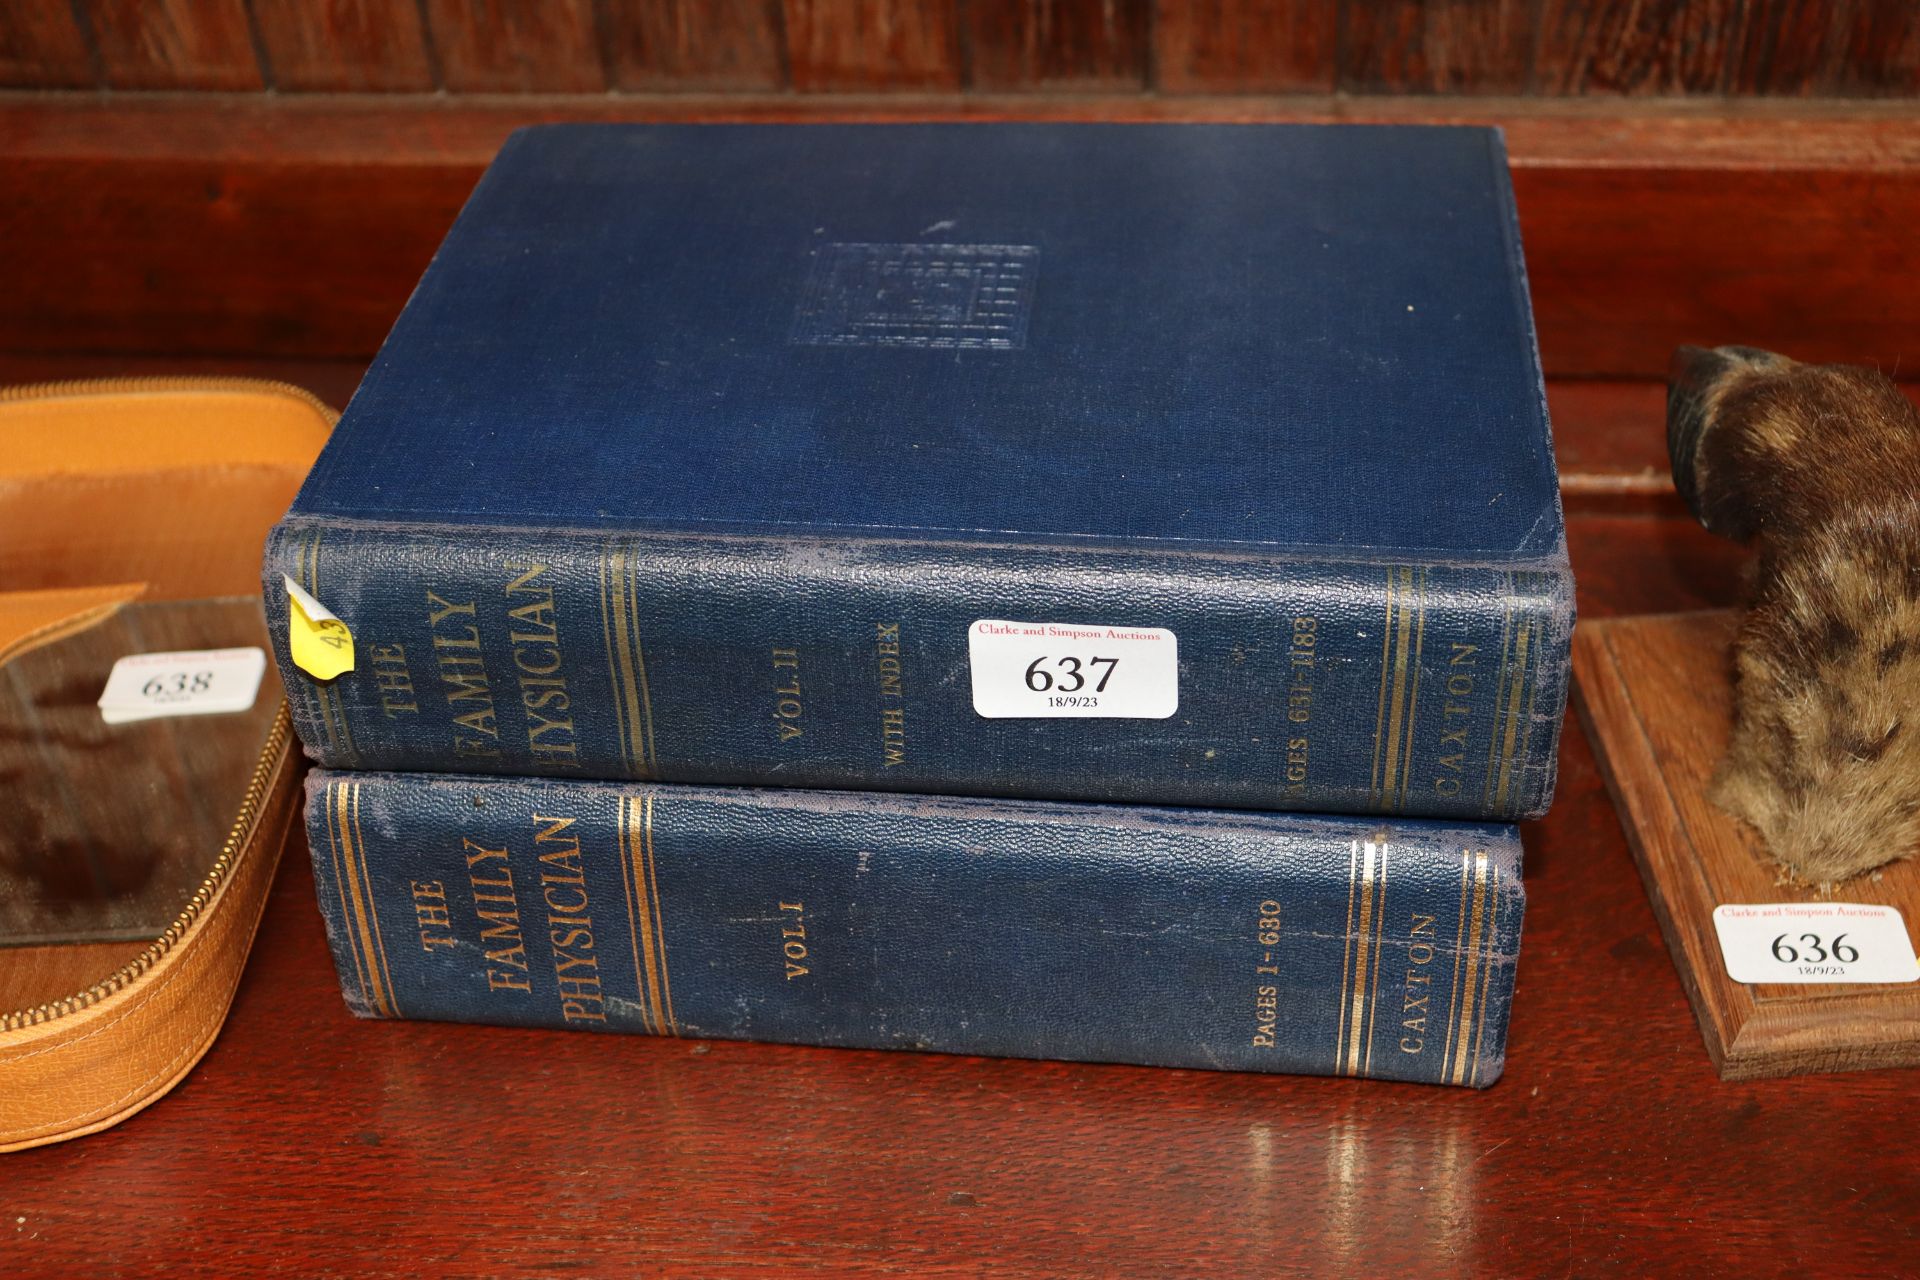 Two volumes of "The Family Physician"